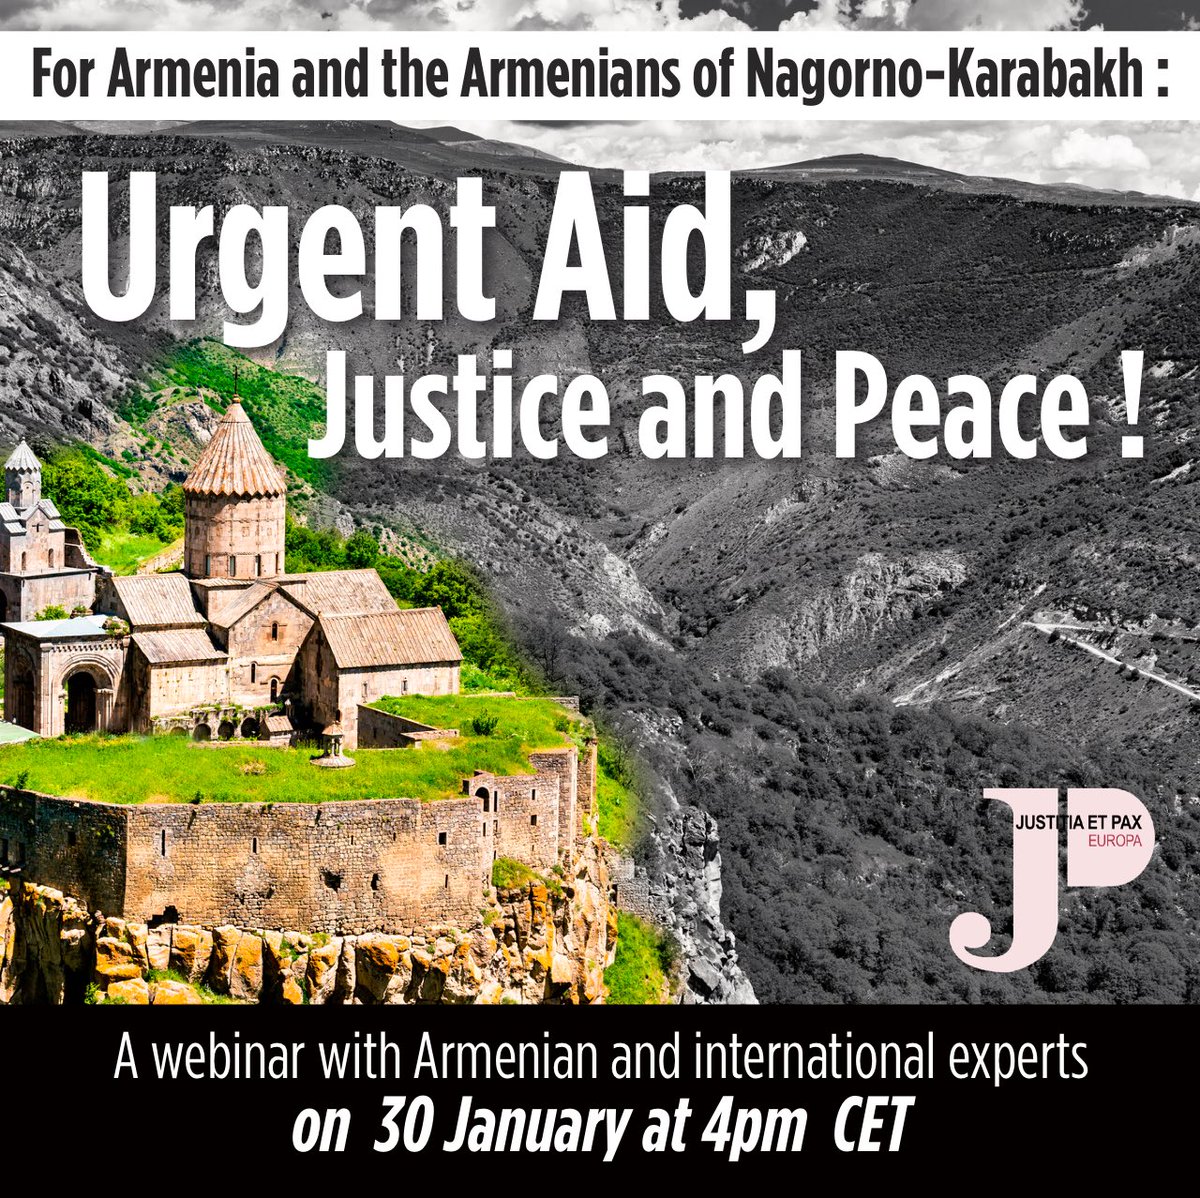 Join us tomorrow Tuesday 30 January at 16.00 CET: 'For Armenia and the Armenians of Nagorno-Karabakh: Urgent Aid, Peace and Justice!' with Armenian and international experts organised by Justice and Peace Europe. For registration: docs.google.com/forms/d/e/1FAI…